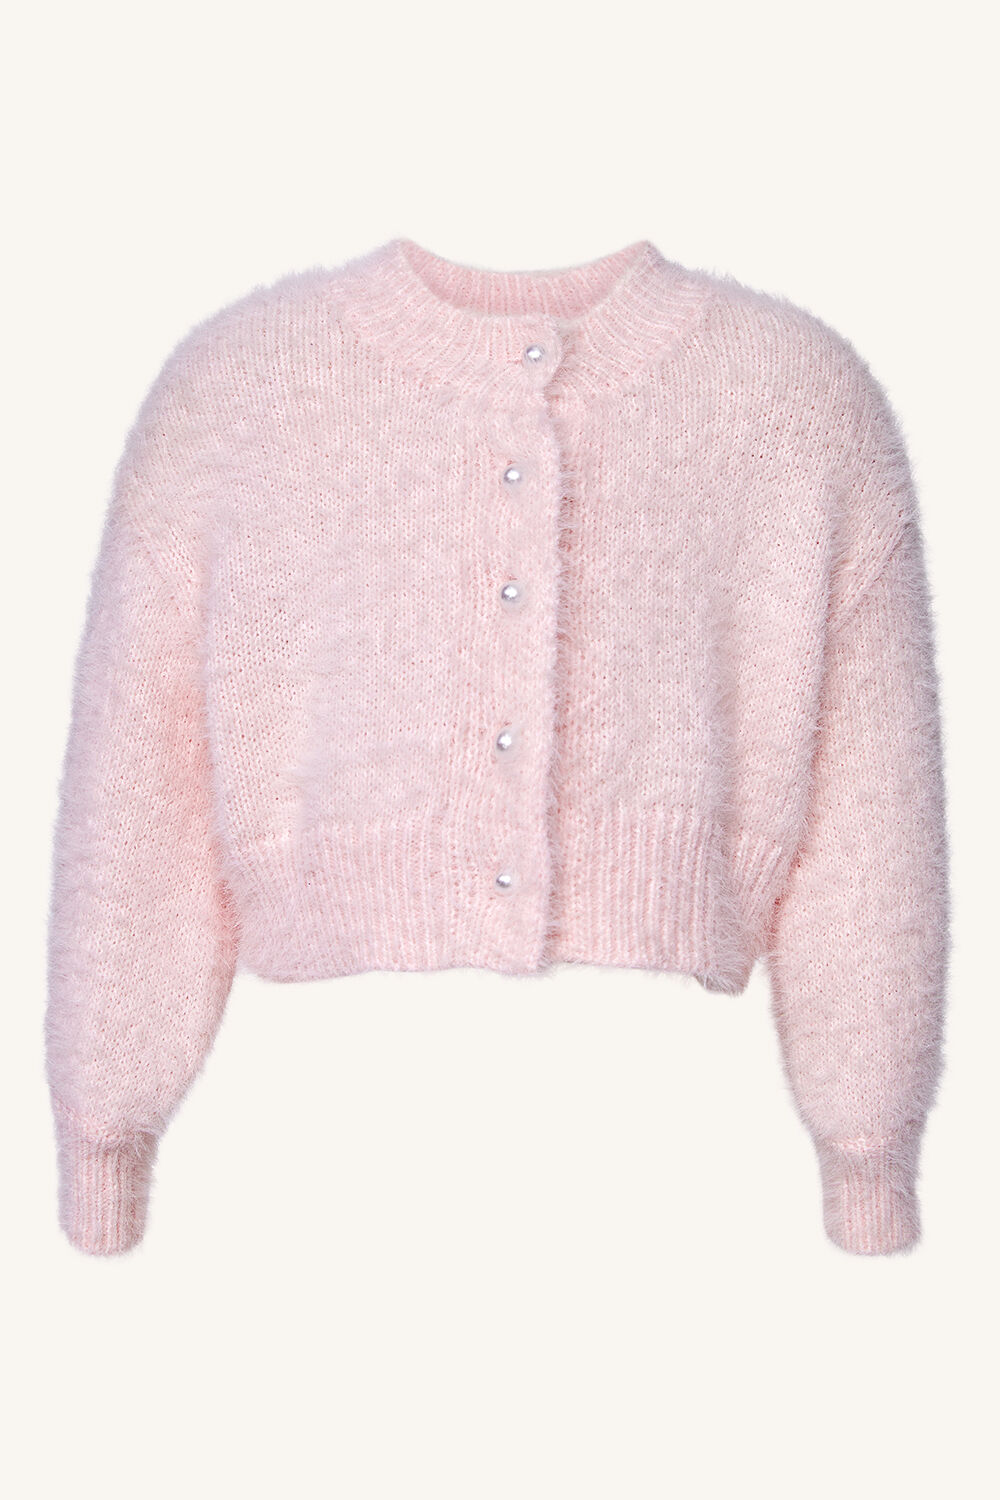 BABY GIRL BELL SLEEVE CADI in colour SOFT PINK